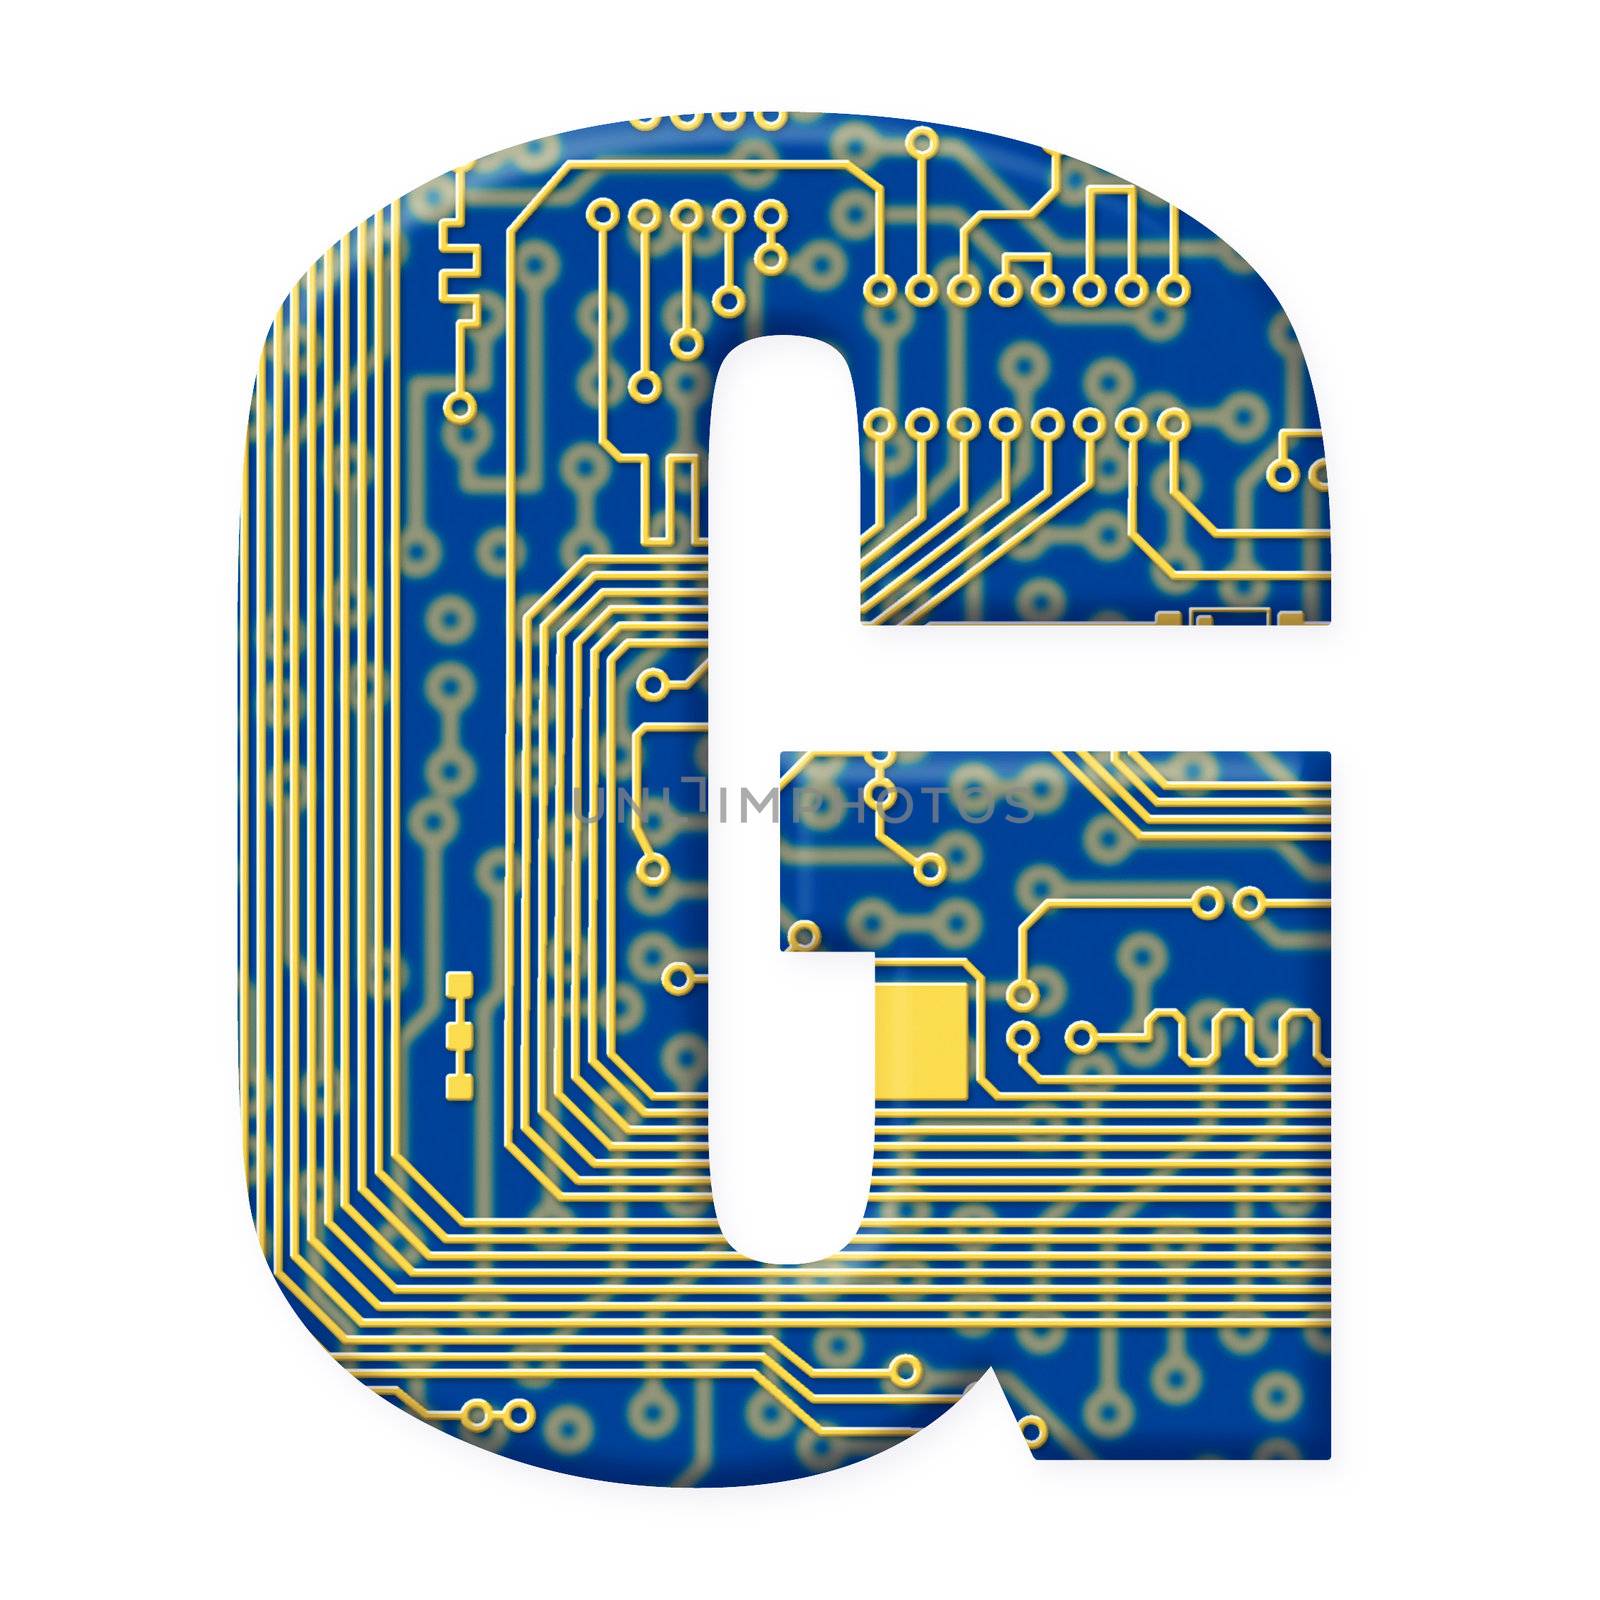 One letter from the electronic technology circuit board alphabet on a white background - G